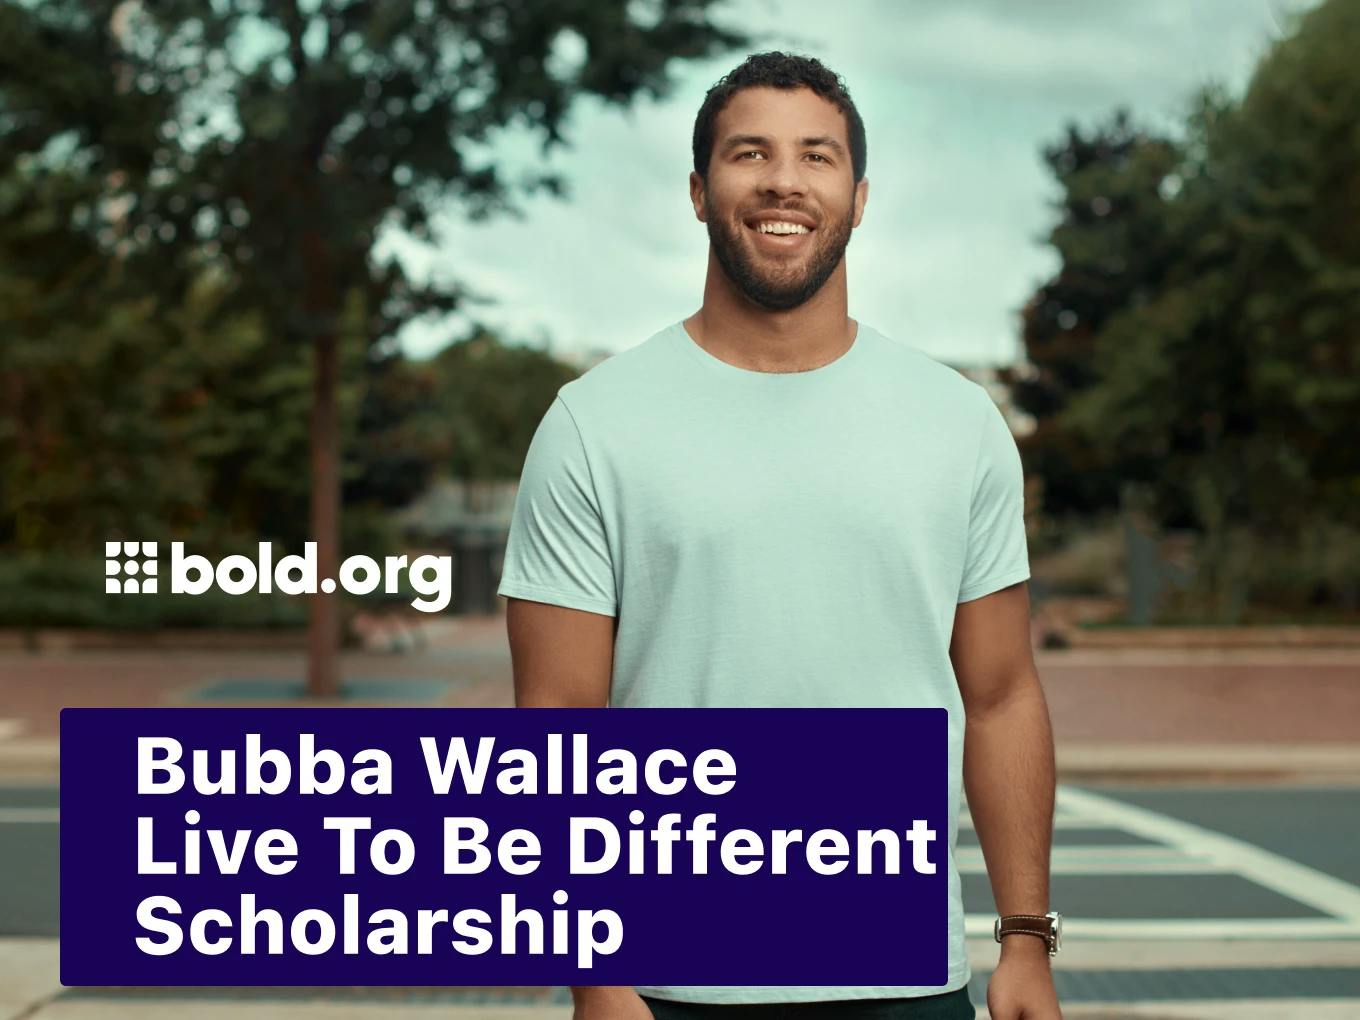 Bubba Wallace Live to Be Different Scholarship